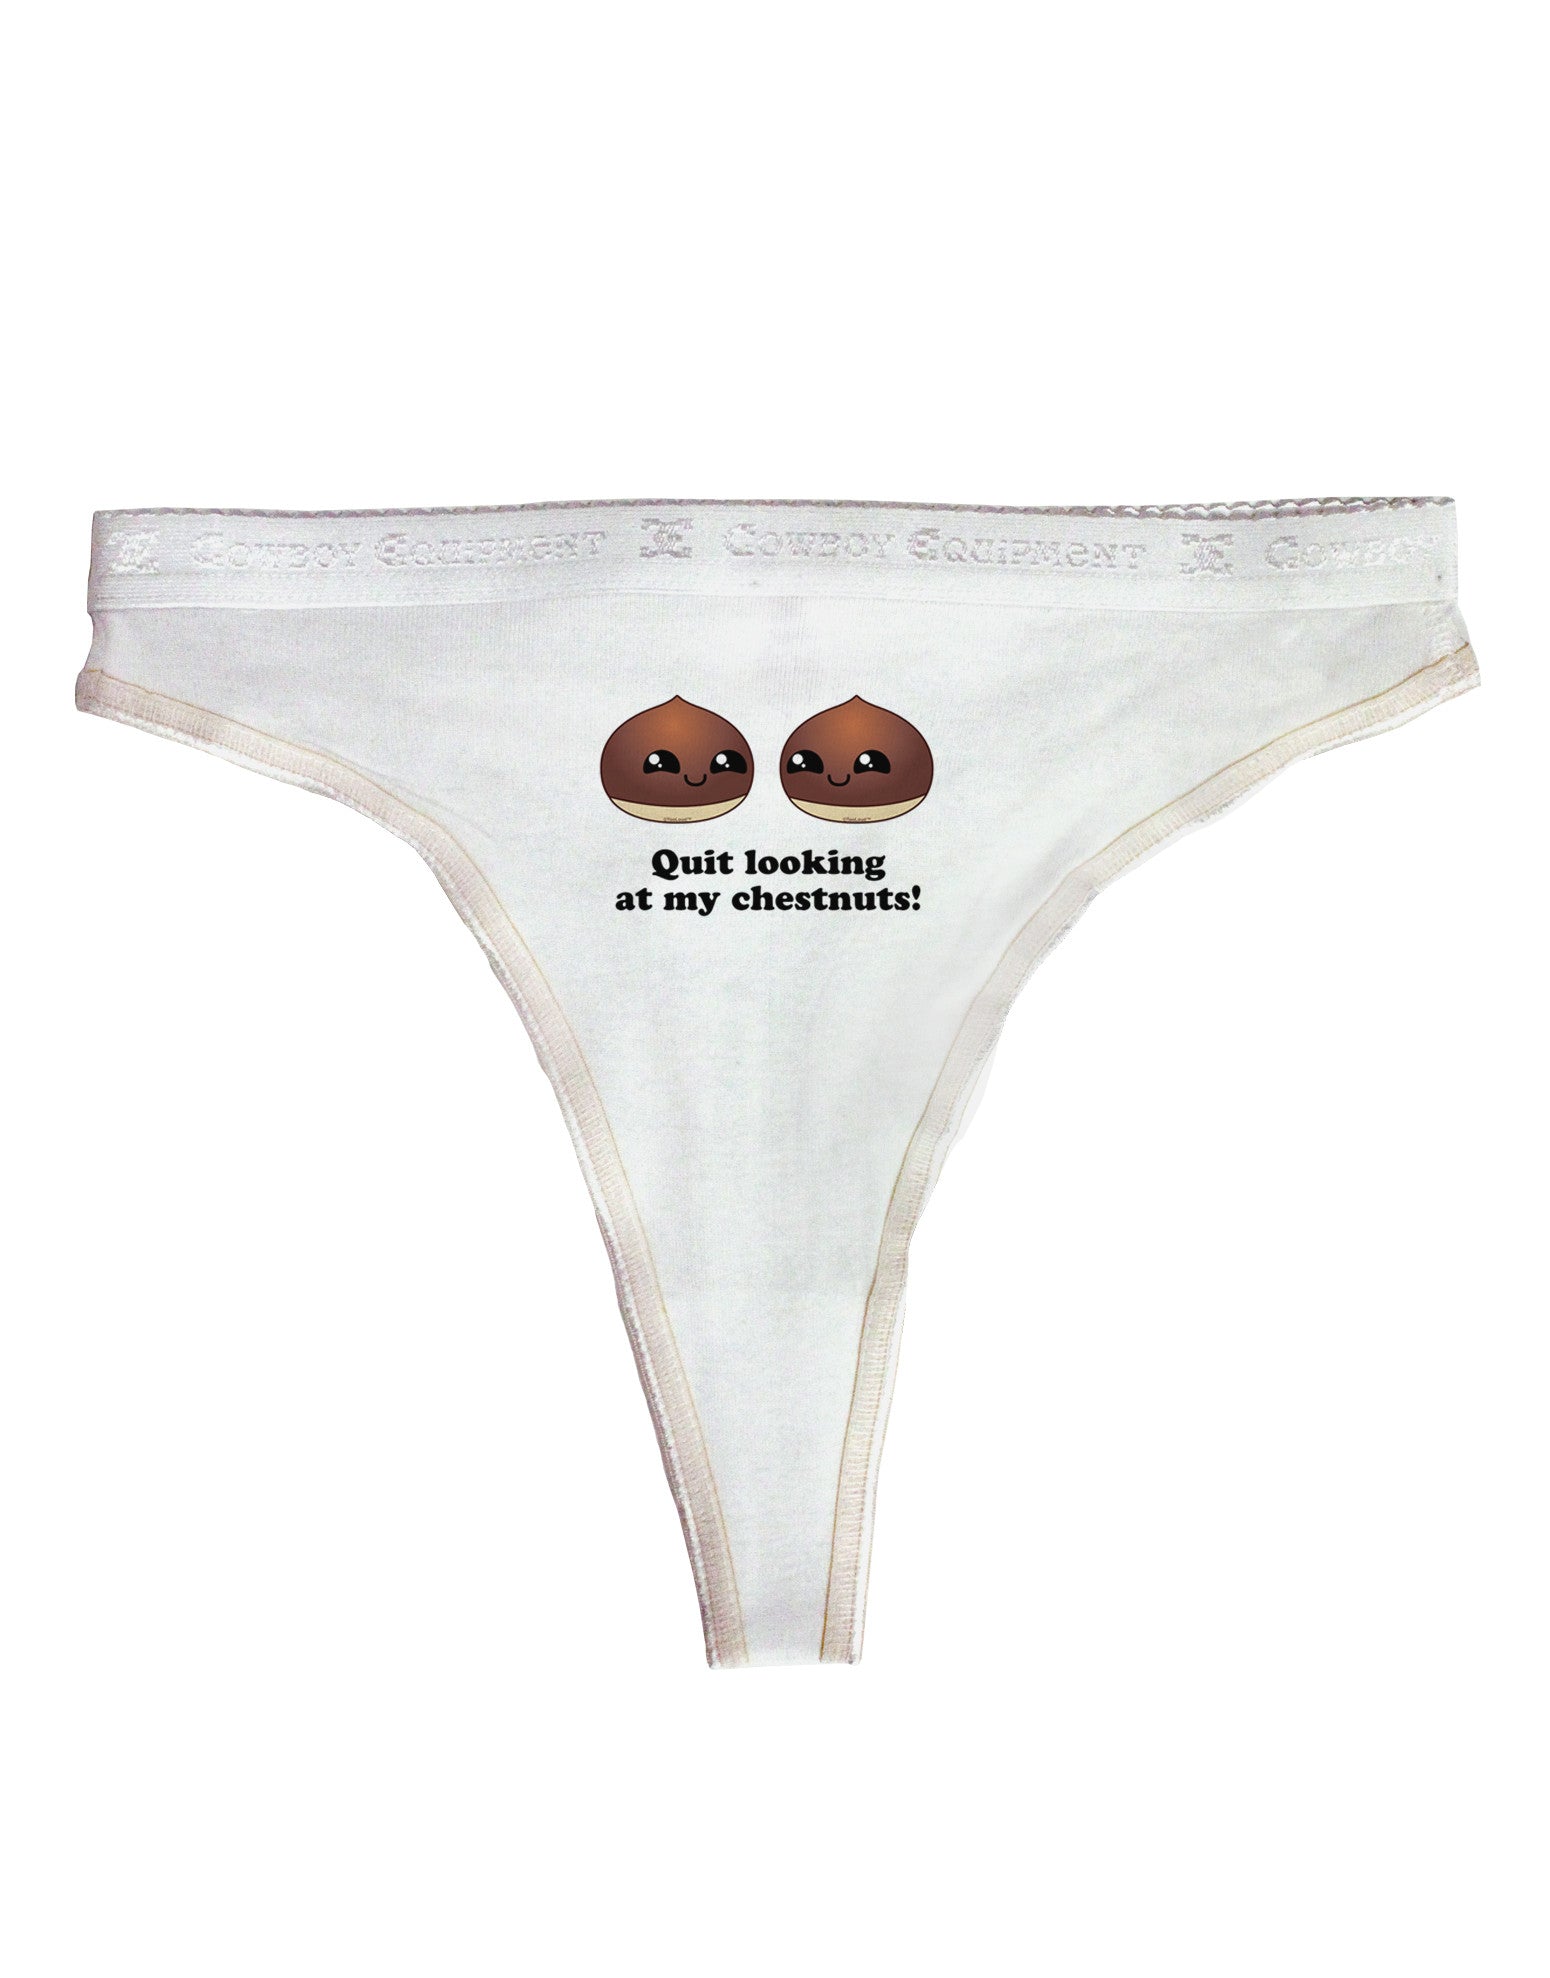 Quit Looking At My Chestnuts - Funny Womens Thong Underwear